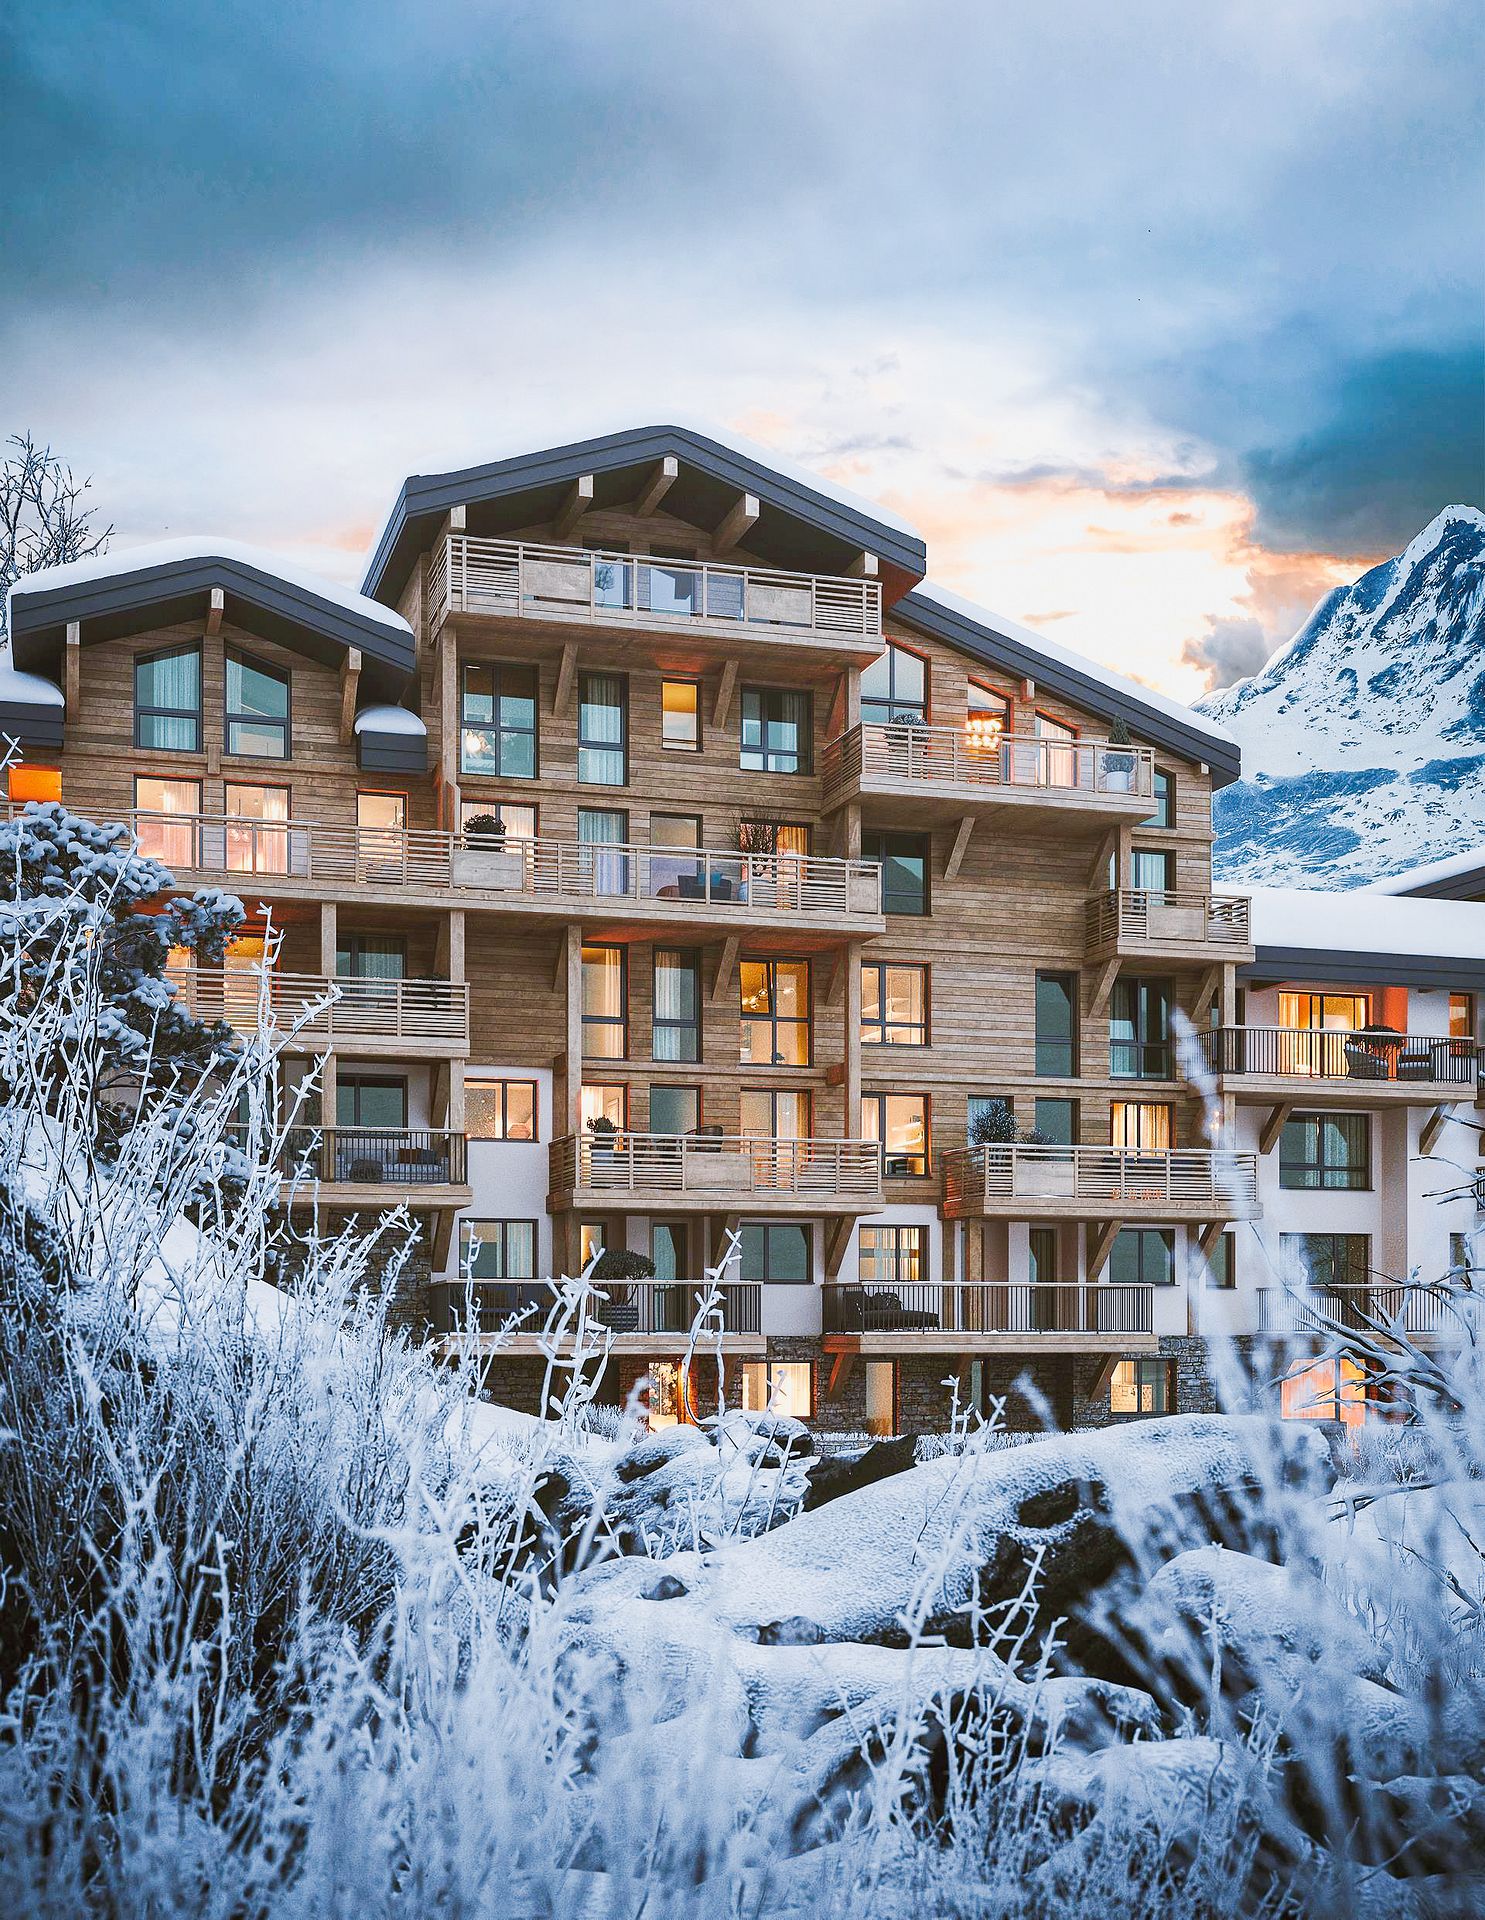 2 bed Apartment For Sale in Espace Killy, French Alps